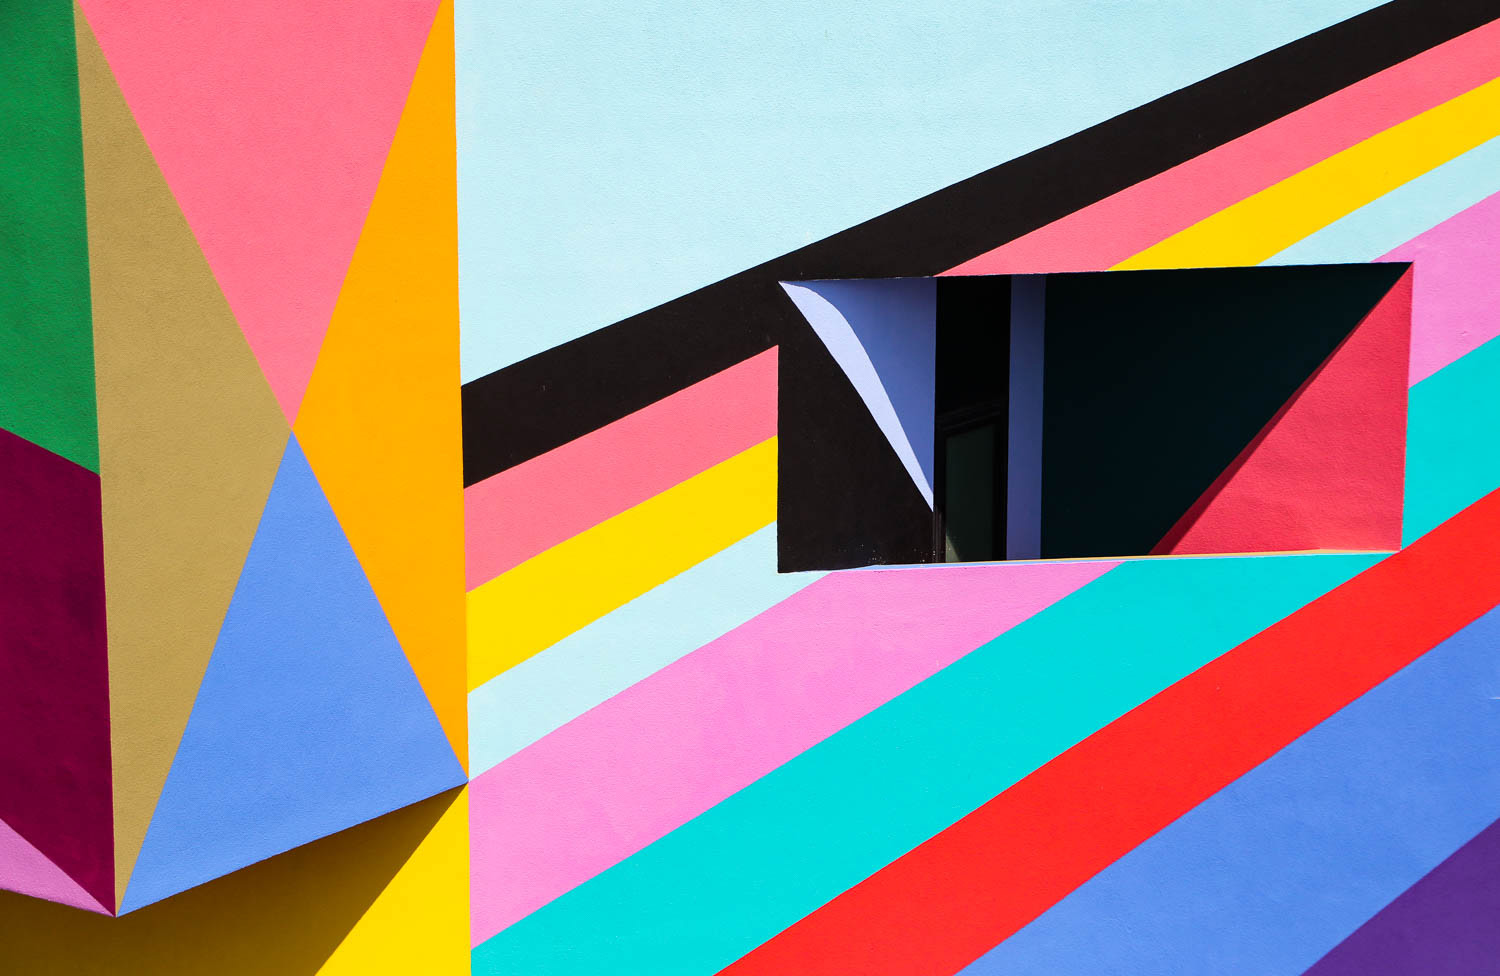 An extreme close up of the brightly coloured geometric mural, in pink, yellow, blue, red, orange and black.